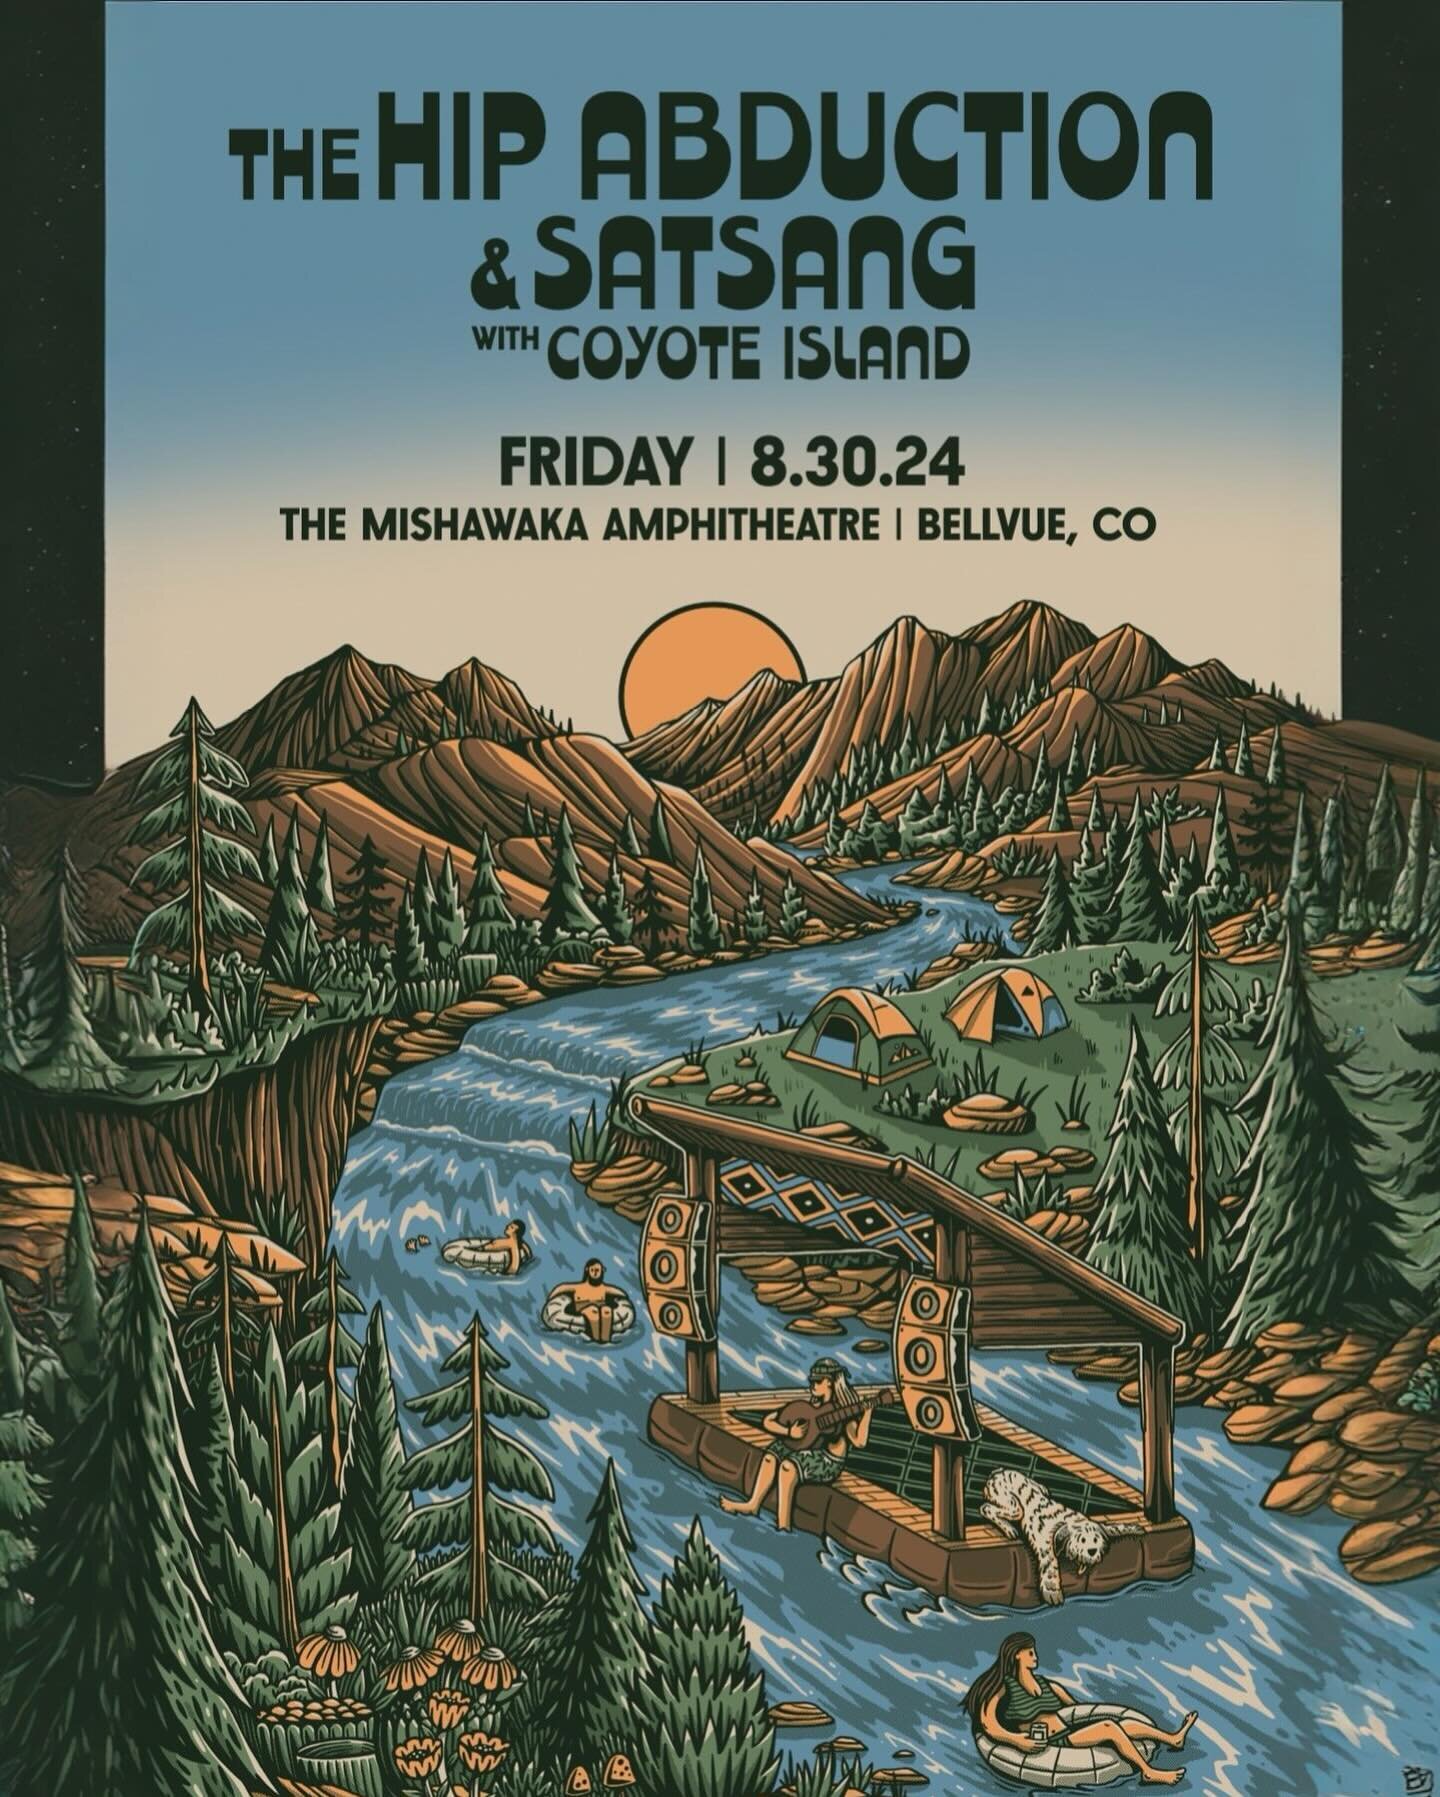 COLORADO! Beyond stoked to be playing the @mishawakaamphitheatre with our homies @satsang + @coyoteisland on 8.30.24. One of the dopest lil outdoor venues around. Tix on sale this Friday at 10am local time. Join us under the stars ✨ and maybe bring a